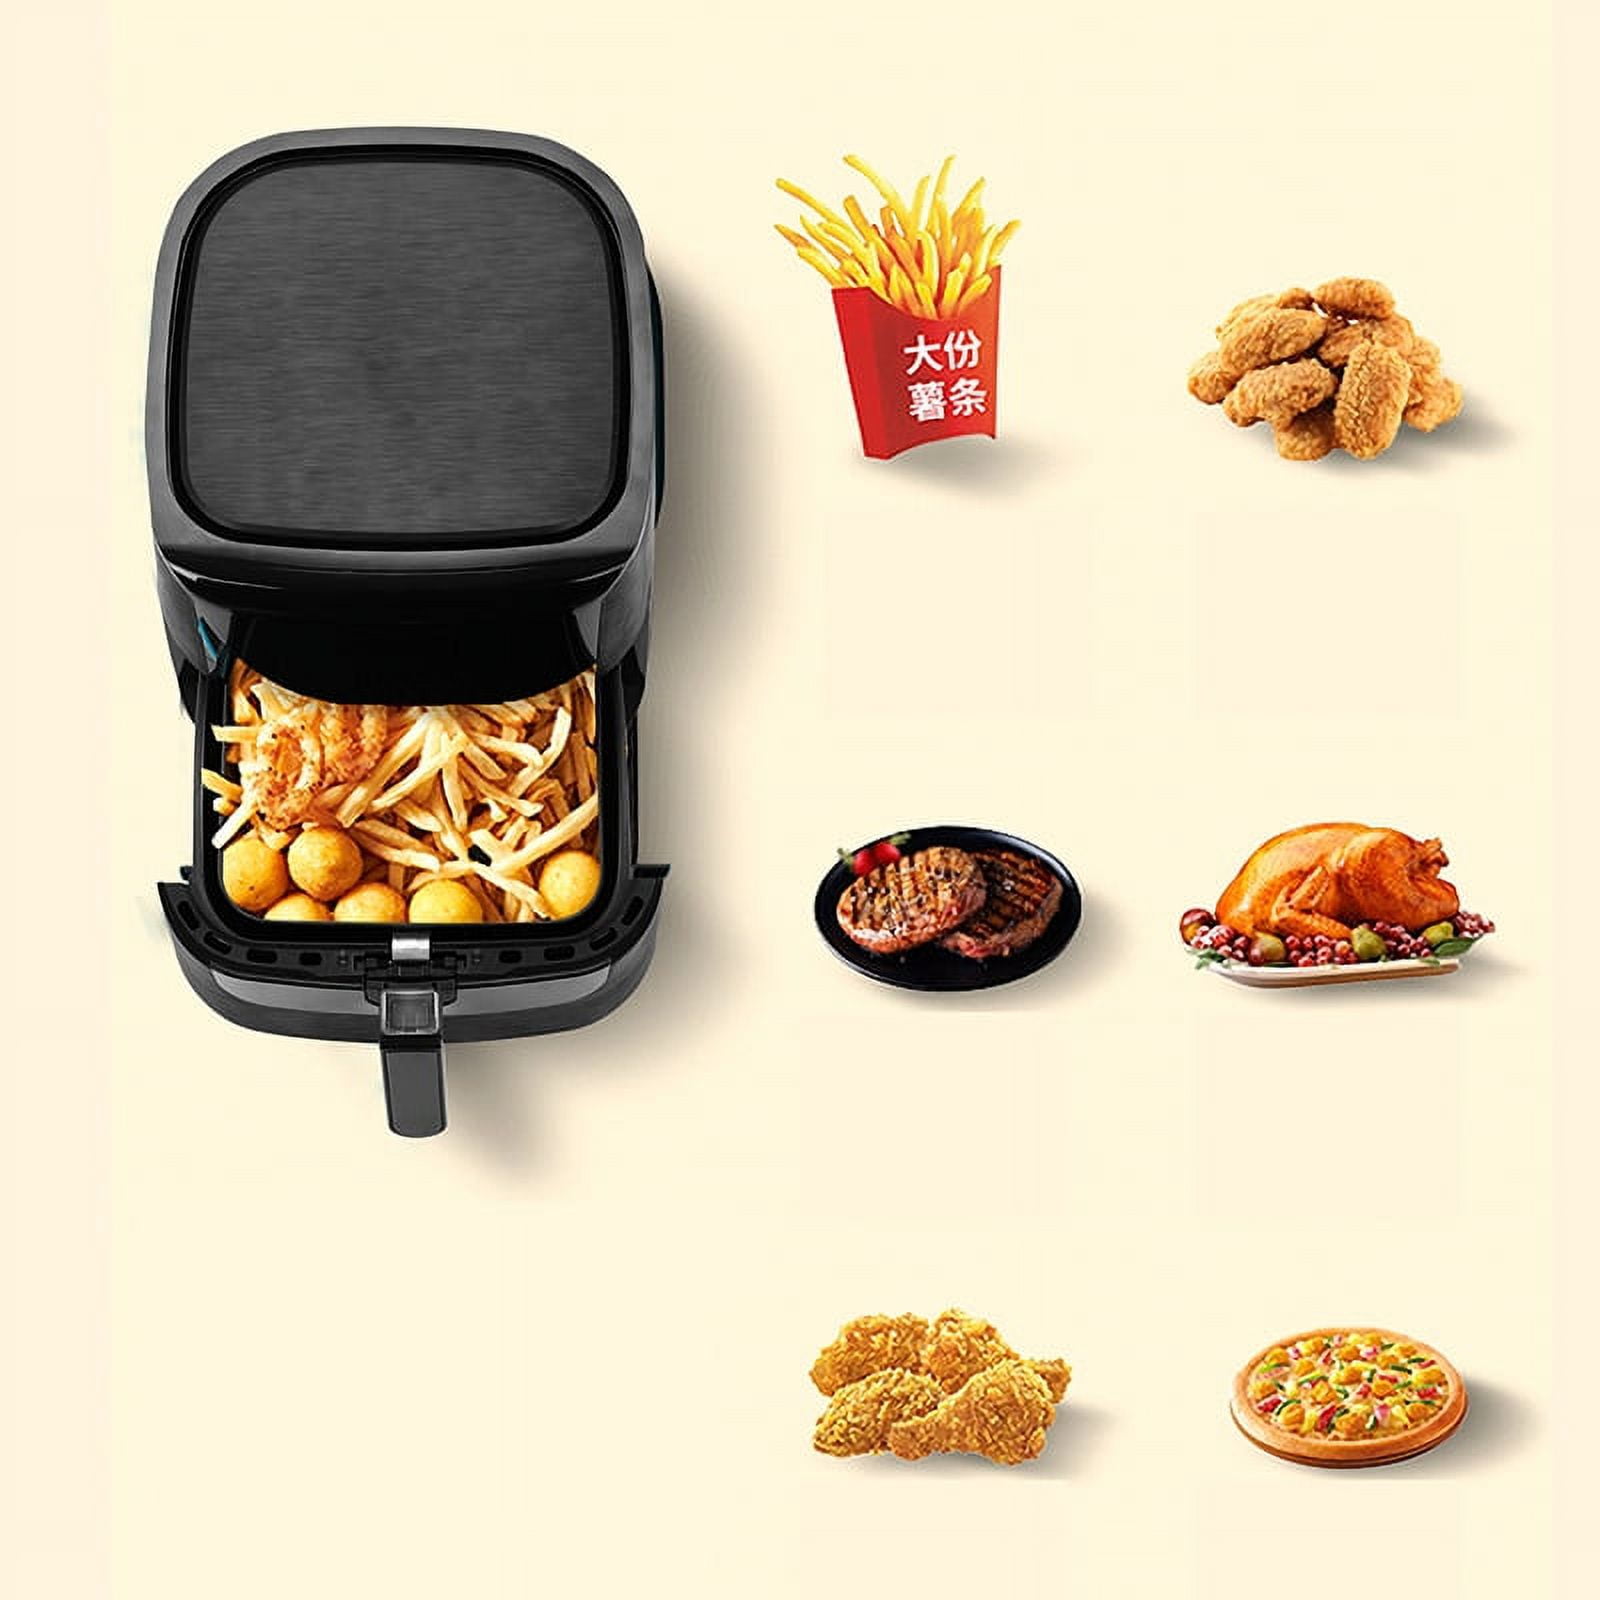 HAUSHOF Air Fryer, 4.2 Quart Compact Small Oven with 9 Cooking Functions,  Nonstick Stainless Steel & Dishwasher-Safe, No-Oil Air Fry, Roast, Bake,  Reheat, Fit for 1-4 People (Black) 